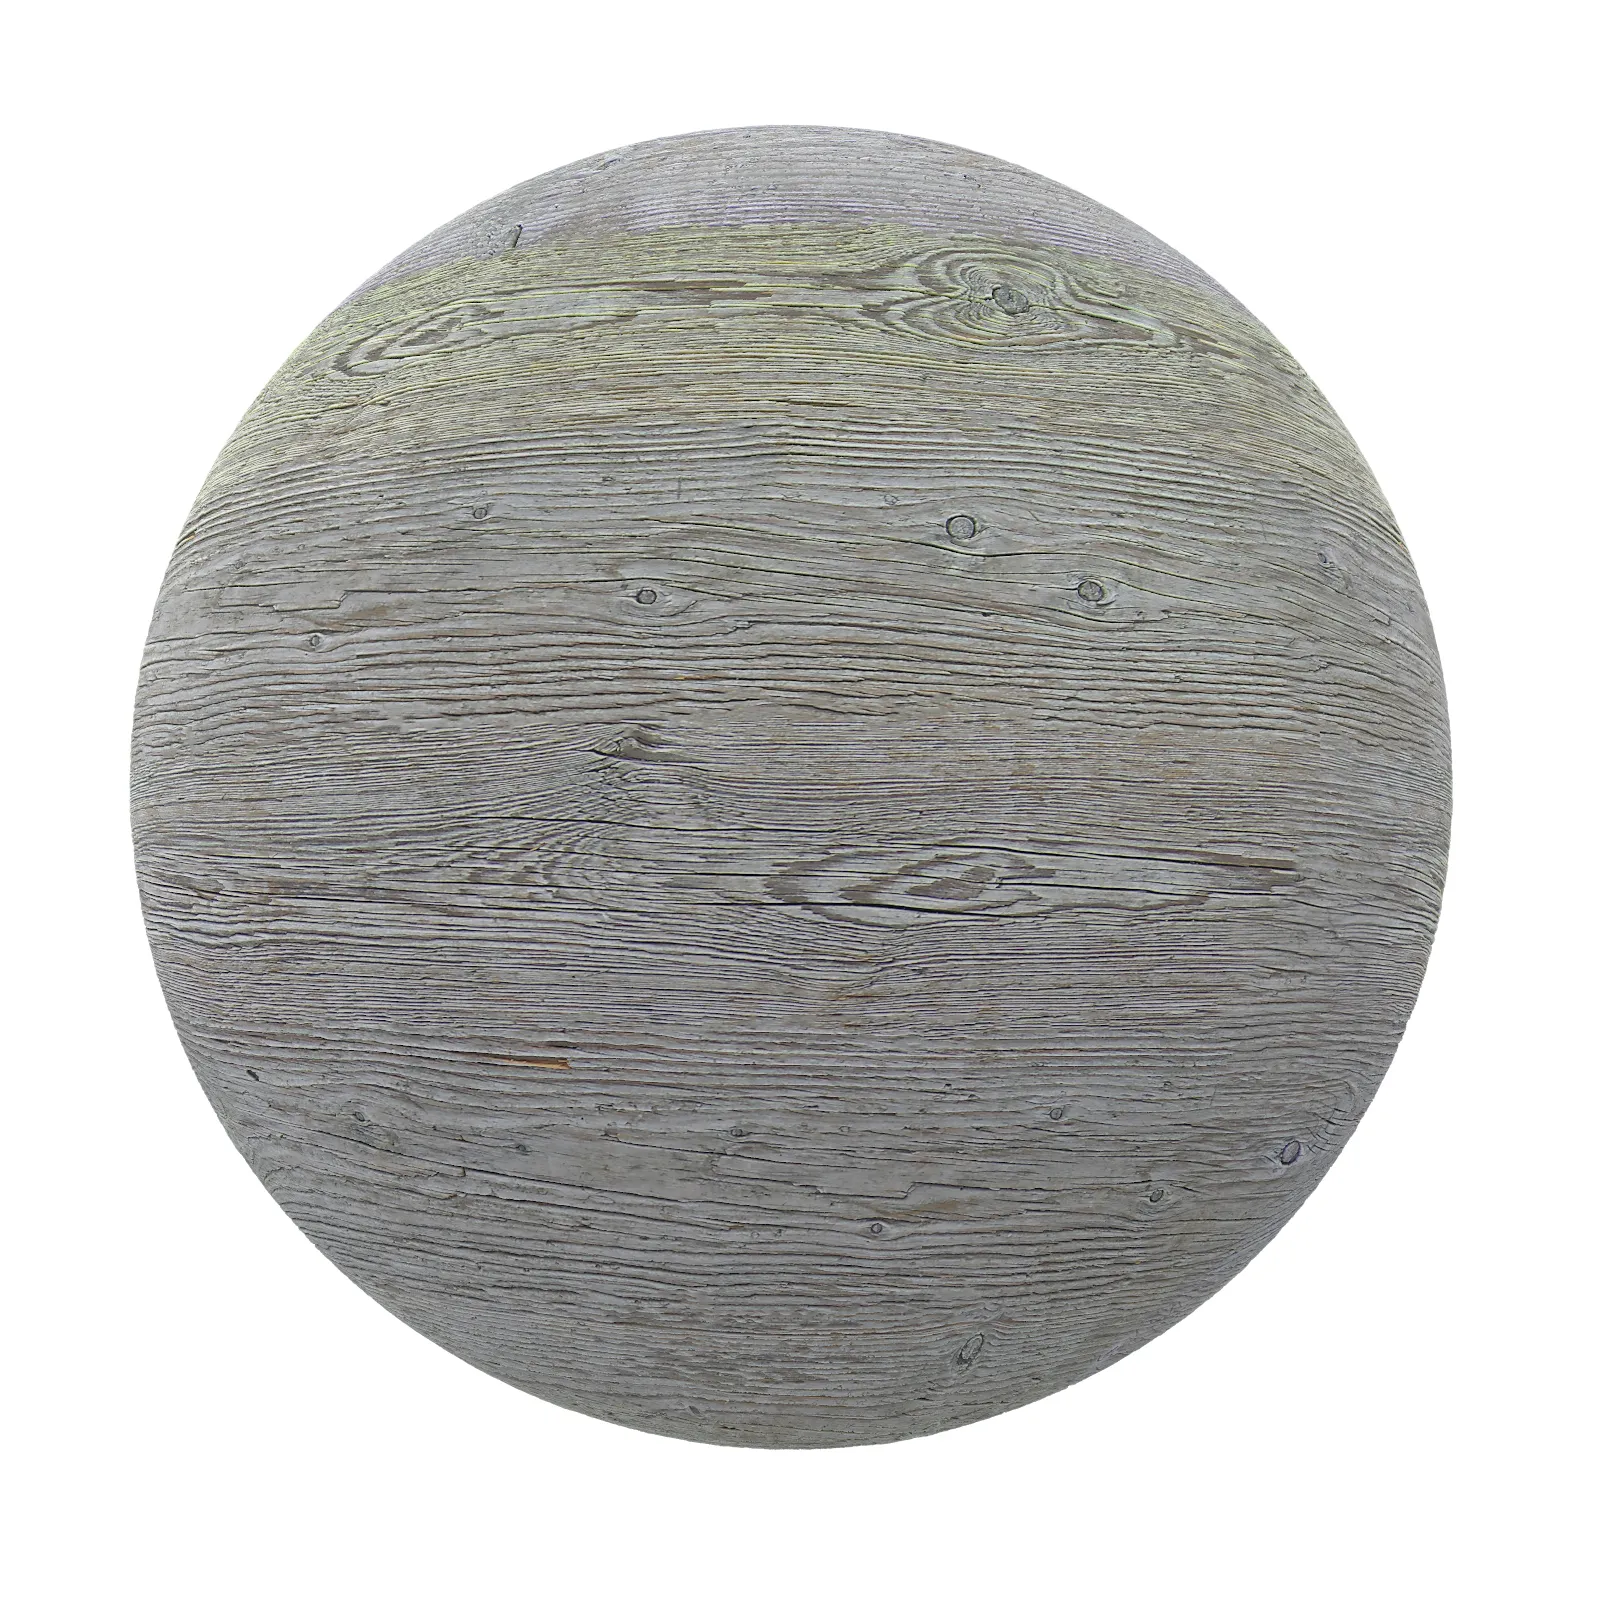 TEXTURES – WOOD – Old Wood 16